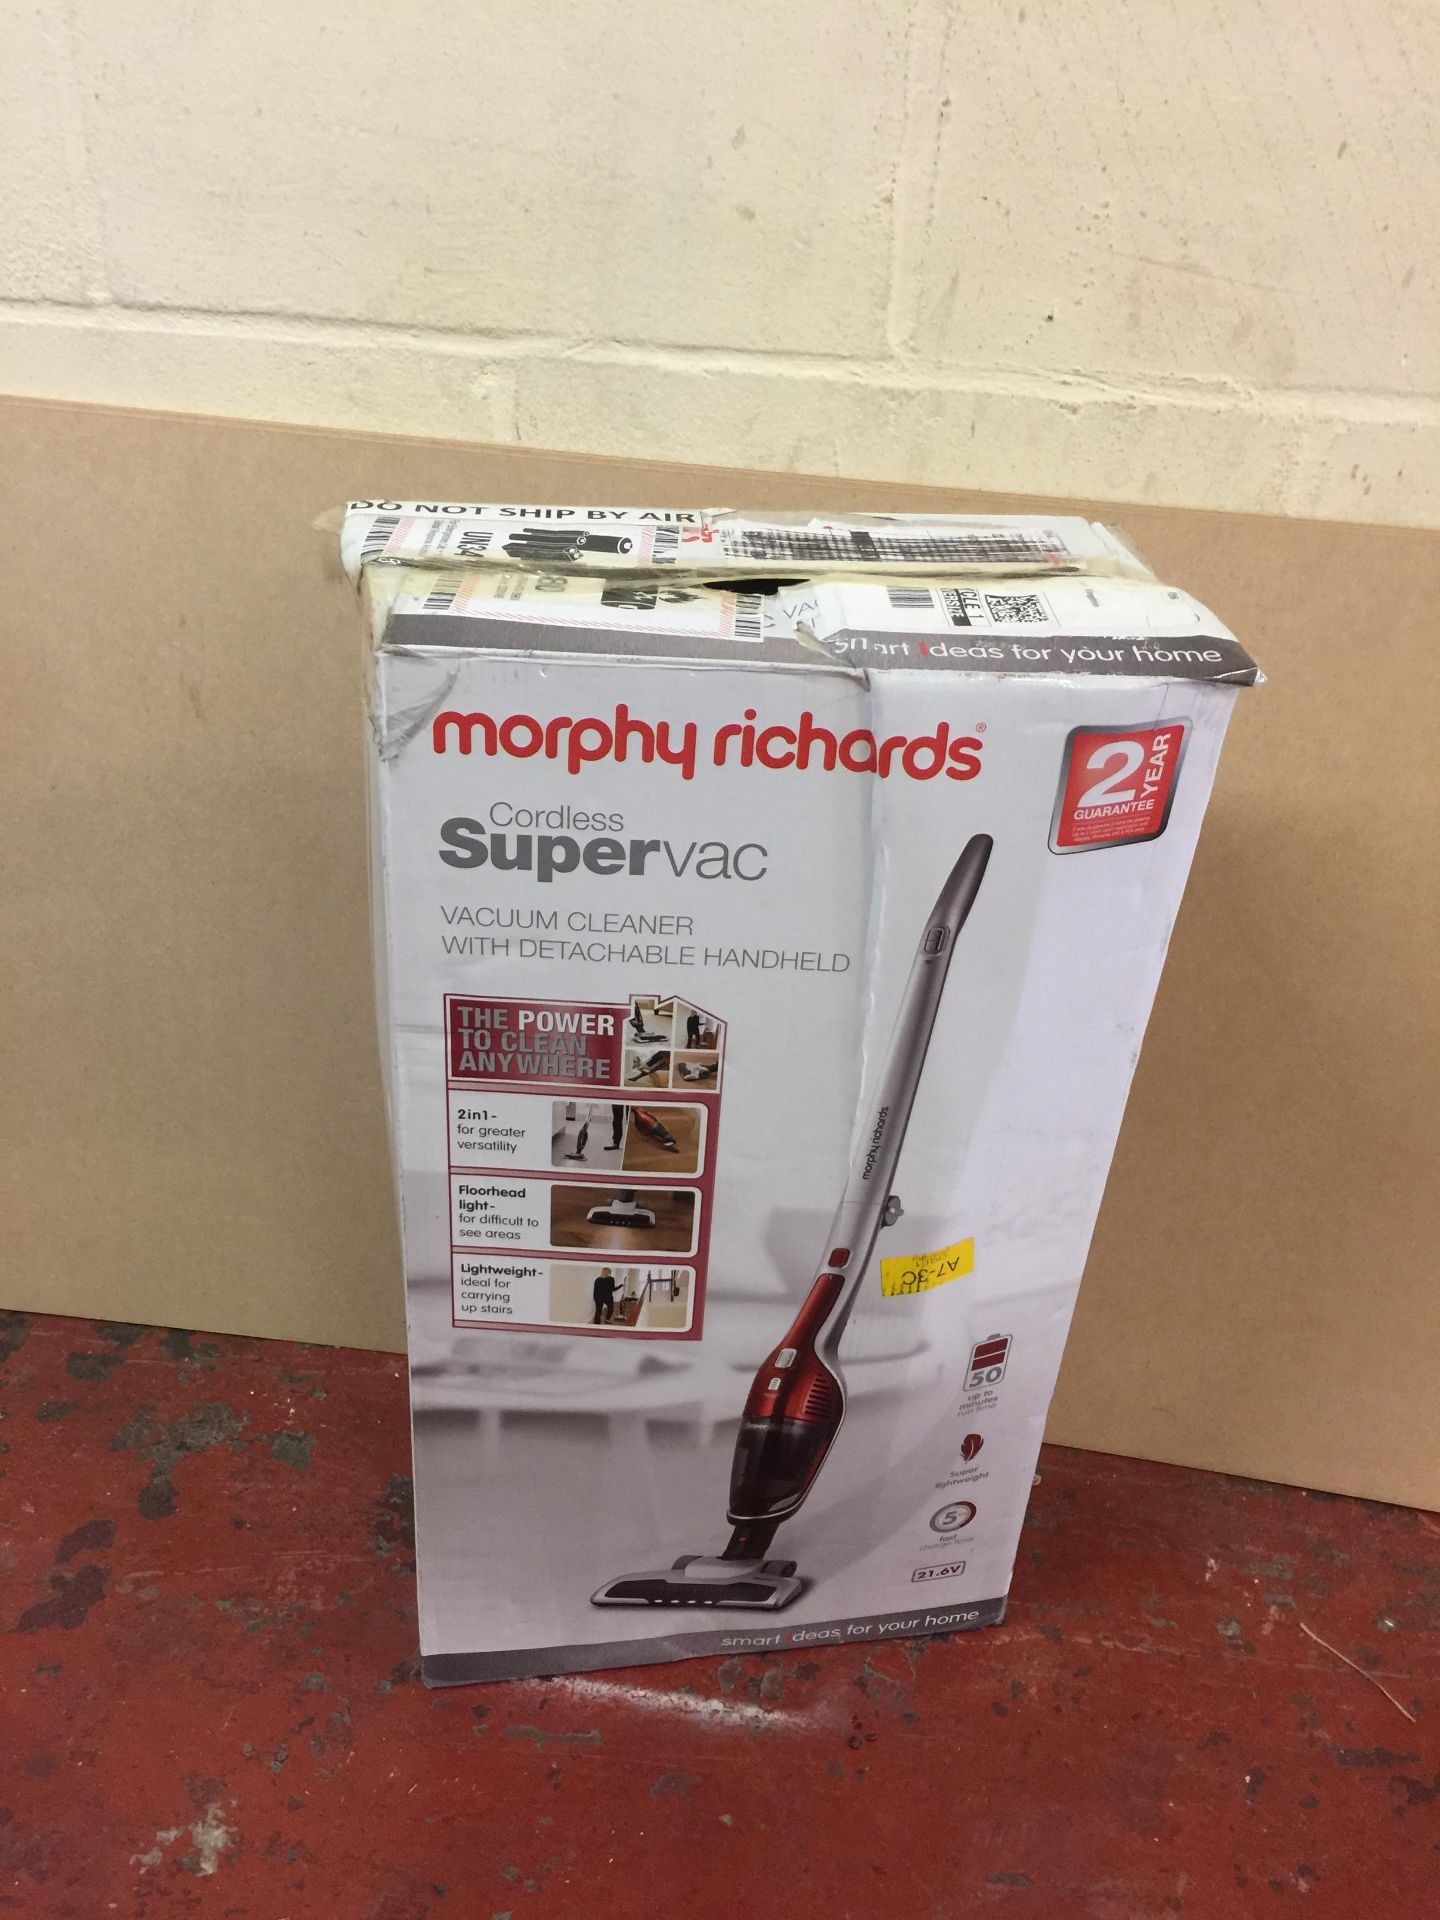 Morphy Richards Supervac 2-In-1 Cordless Vacuum Cleaner